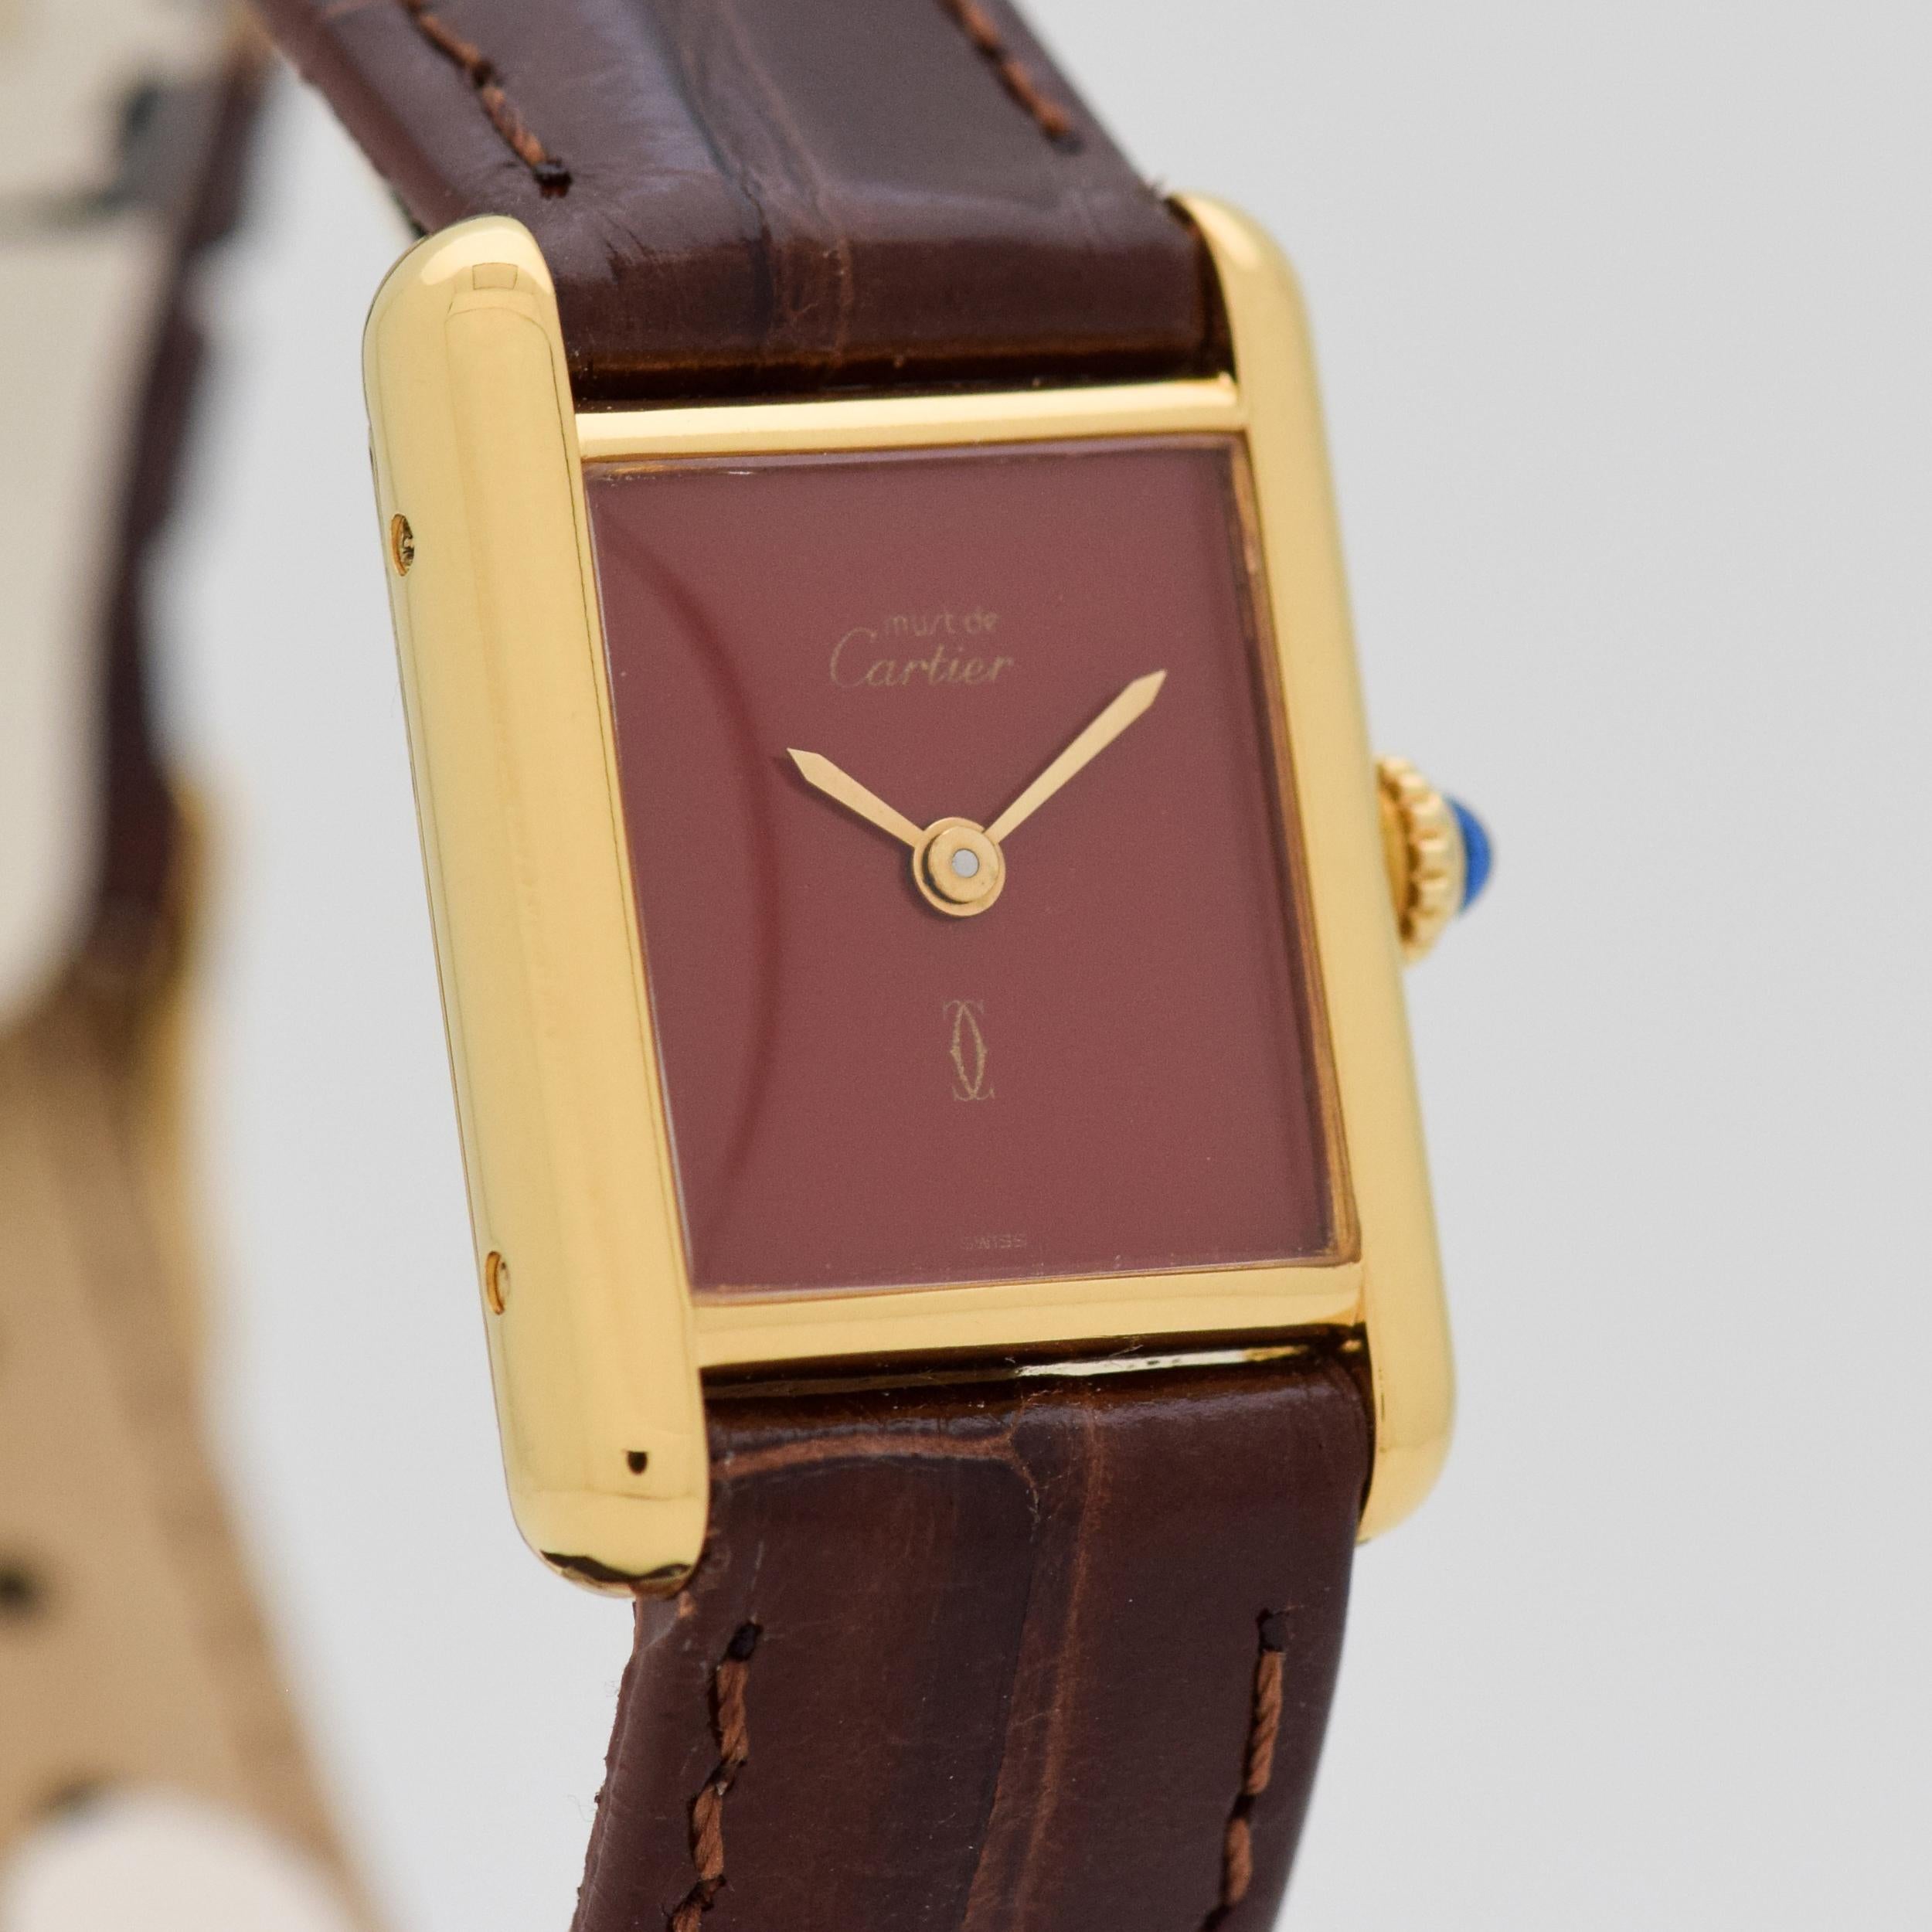 1990's Cartier Standard Ladies Size Must de Tank 18k Yellow Gold Electroplated Over Sterling Silver case Mechanical Wind watch with Original Red/Maroon Dial. Case size, 20mm x 27mm lug to lug (0.79 in. x 1.06 in.) - Powered by a 17-jewel, manual